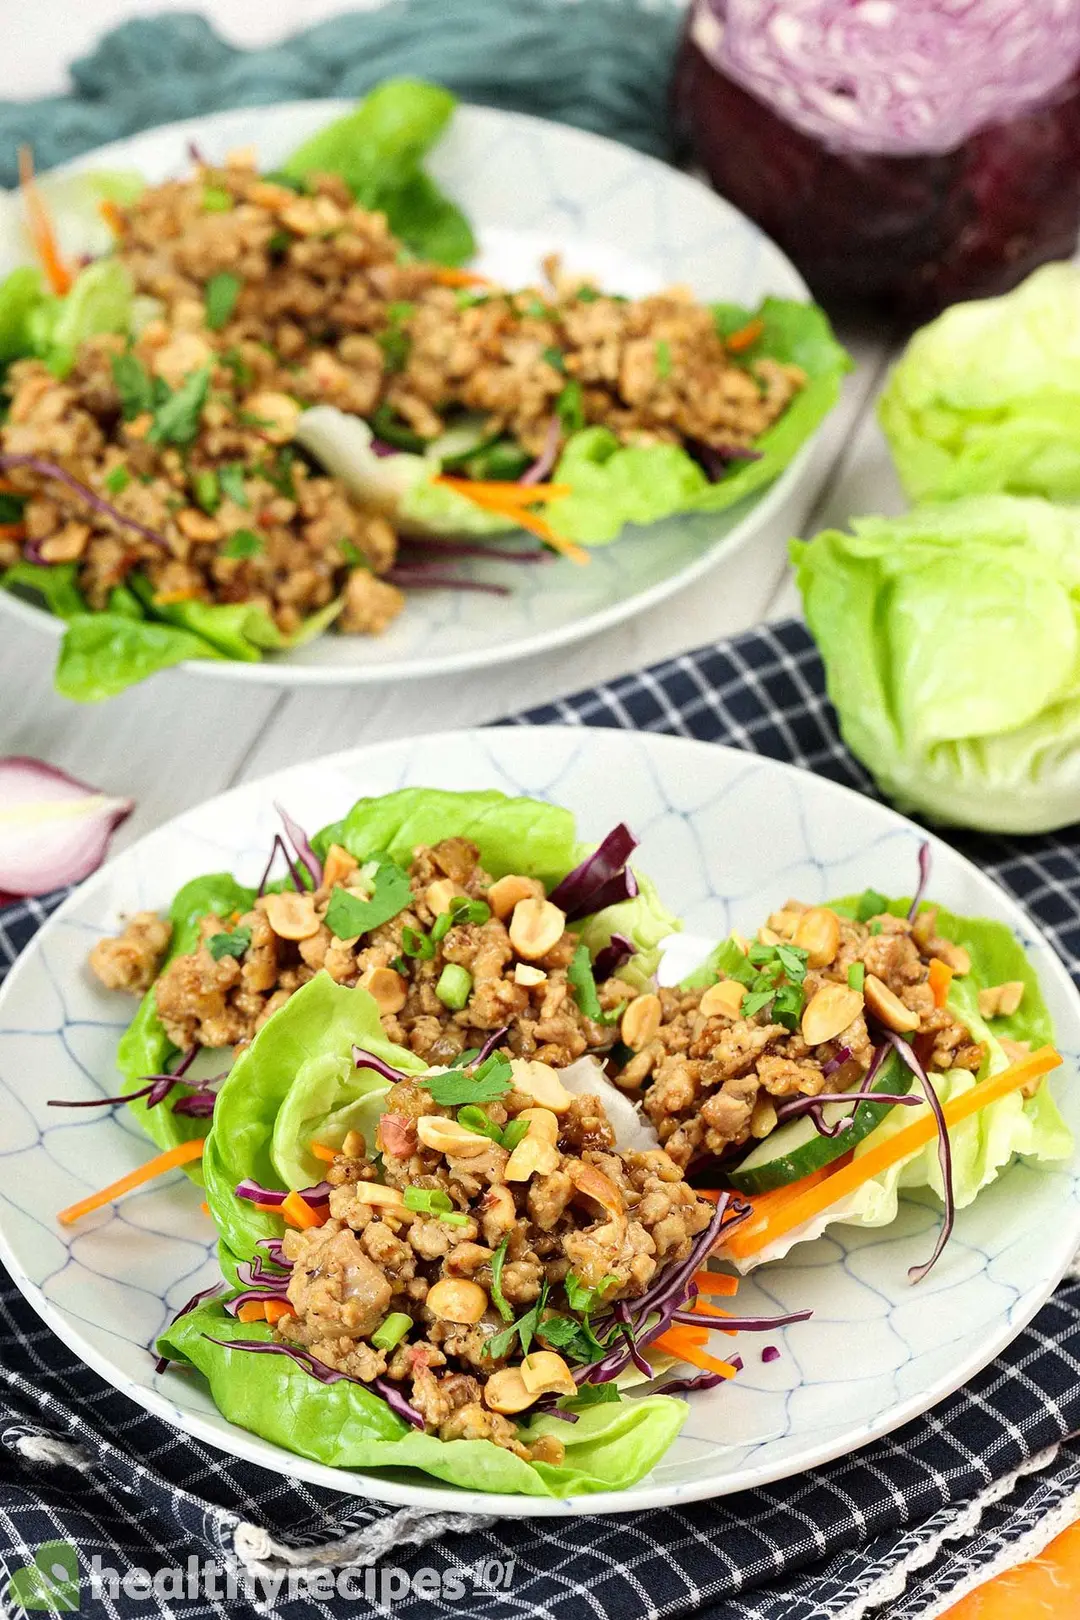 Plates holding lettuce wraps placed on a folded tablecloth and surrounded by lettuce heads and half a red cabbage